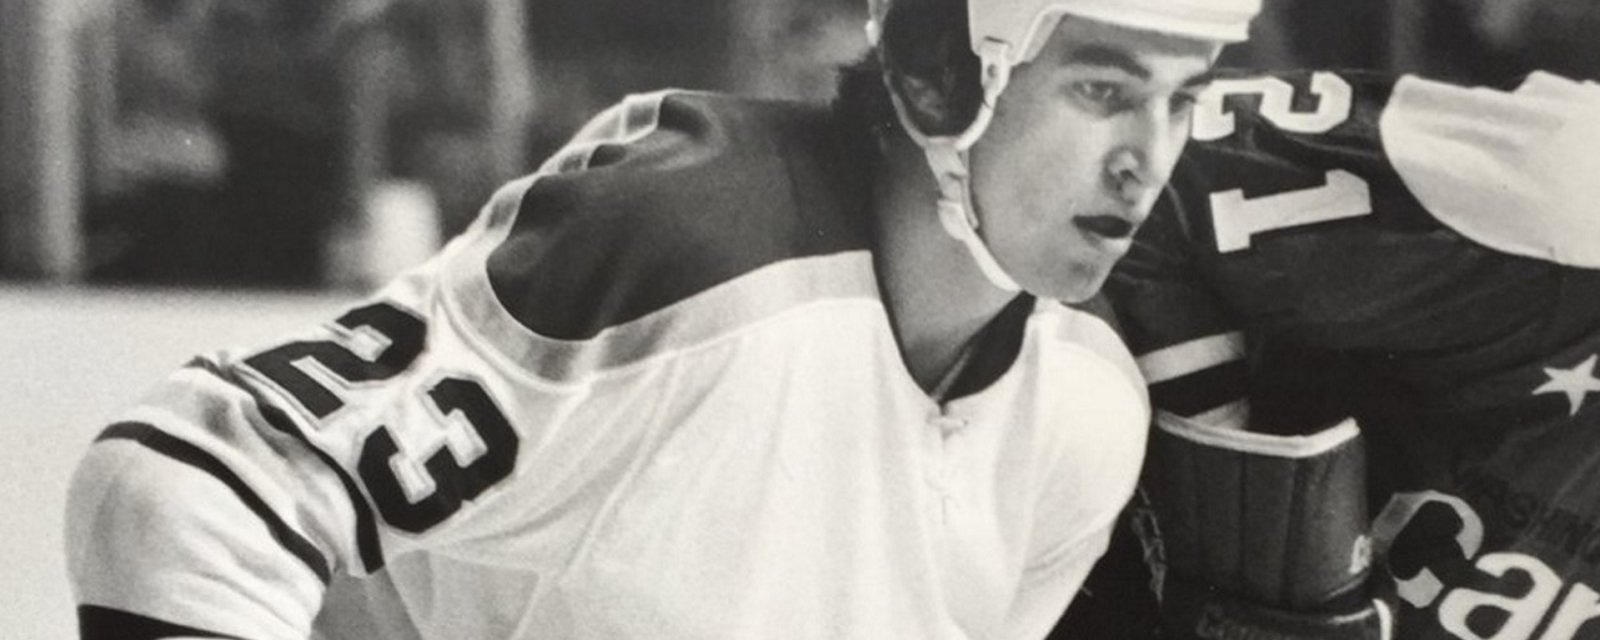 NHL team announces the passing of former player. 